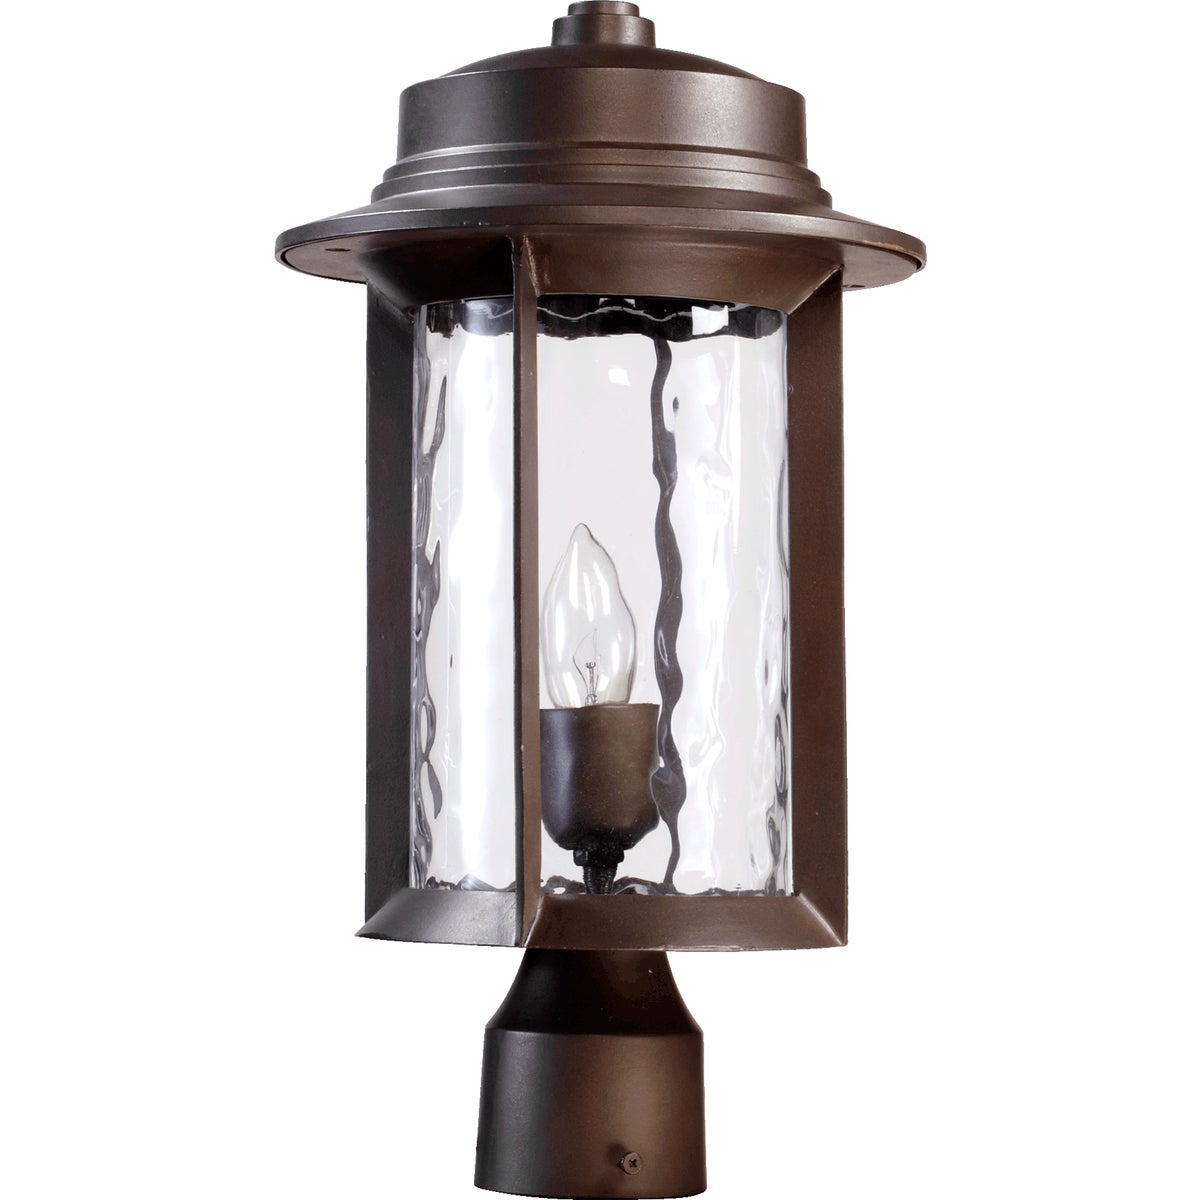 Mid Century Modern Outdoor Post Light with clear glass shade, metal frame, and hammered glass panes. Fits a single dimmable 100W bulb (not included). UL Listed for wet locations. Dimensions: 9.5"W x 17"H. Warranty: 2 Years.